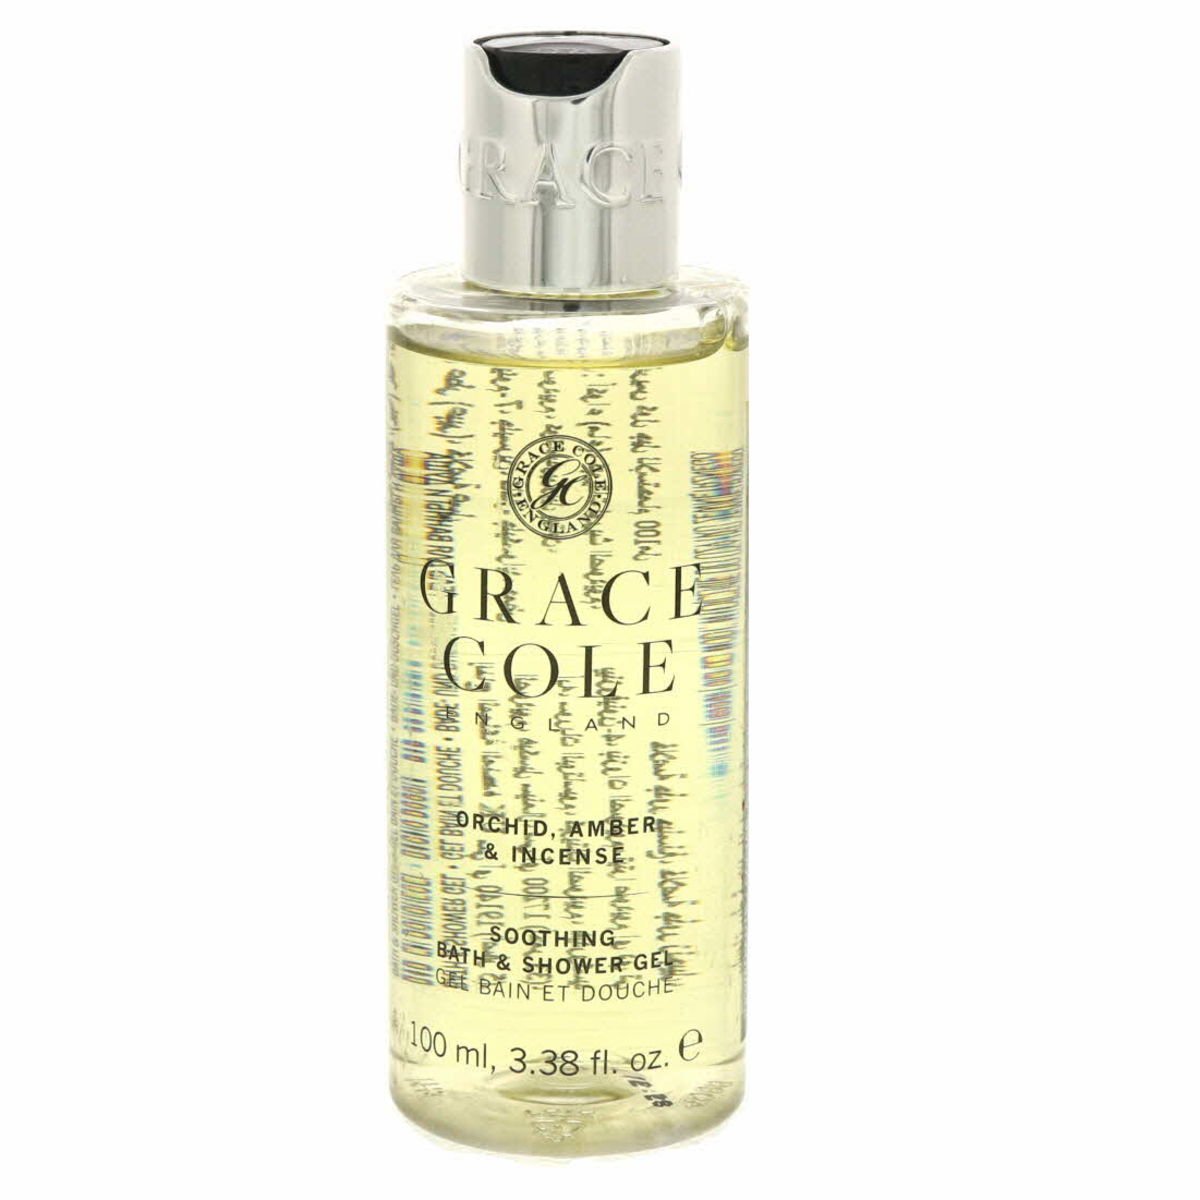 Grace Cole Soothing Bath And Shower Gel Orchid, Amber & Incense 100ml